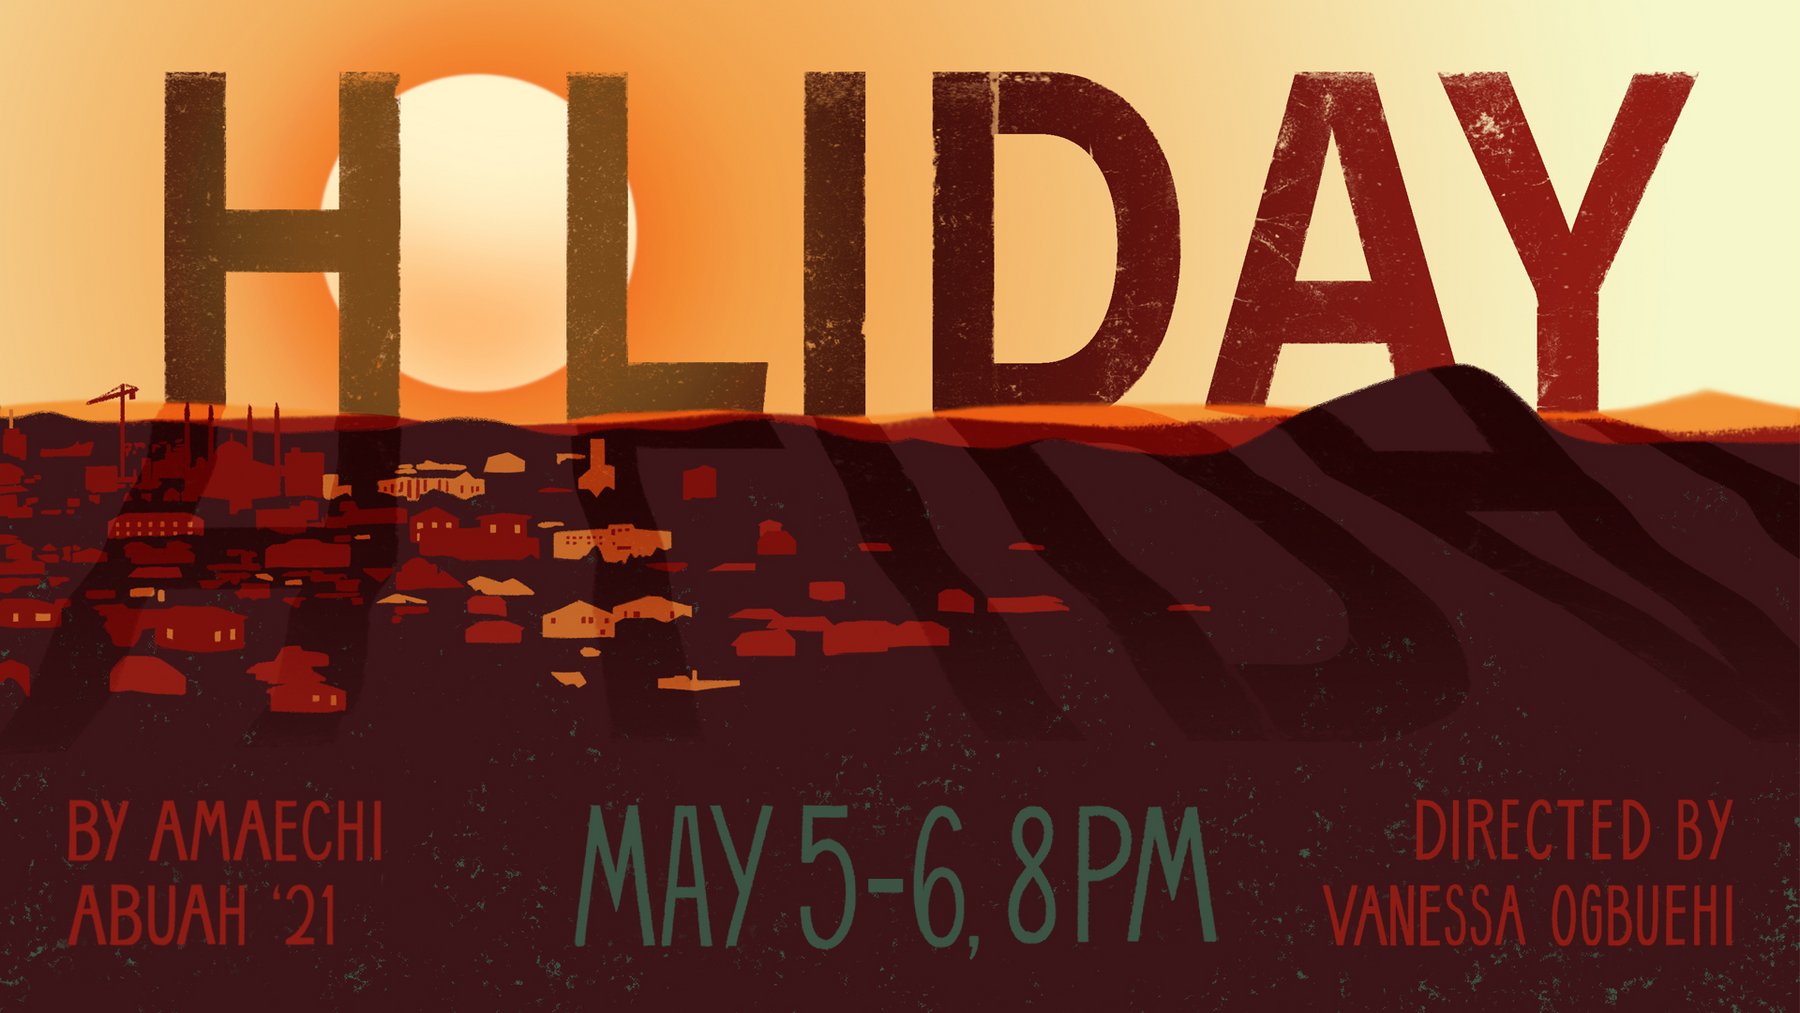 A sun sets over a mountain range and distant town. Text reads "HOLIDAY By Amaechi Abuah '21 May 5-6 8pm Directed by Vanessa Ogbuehi"